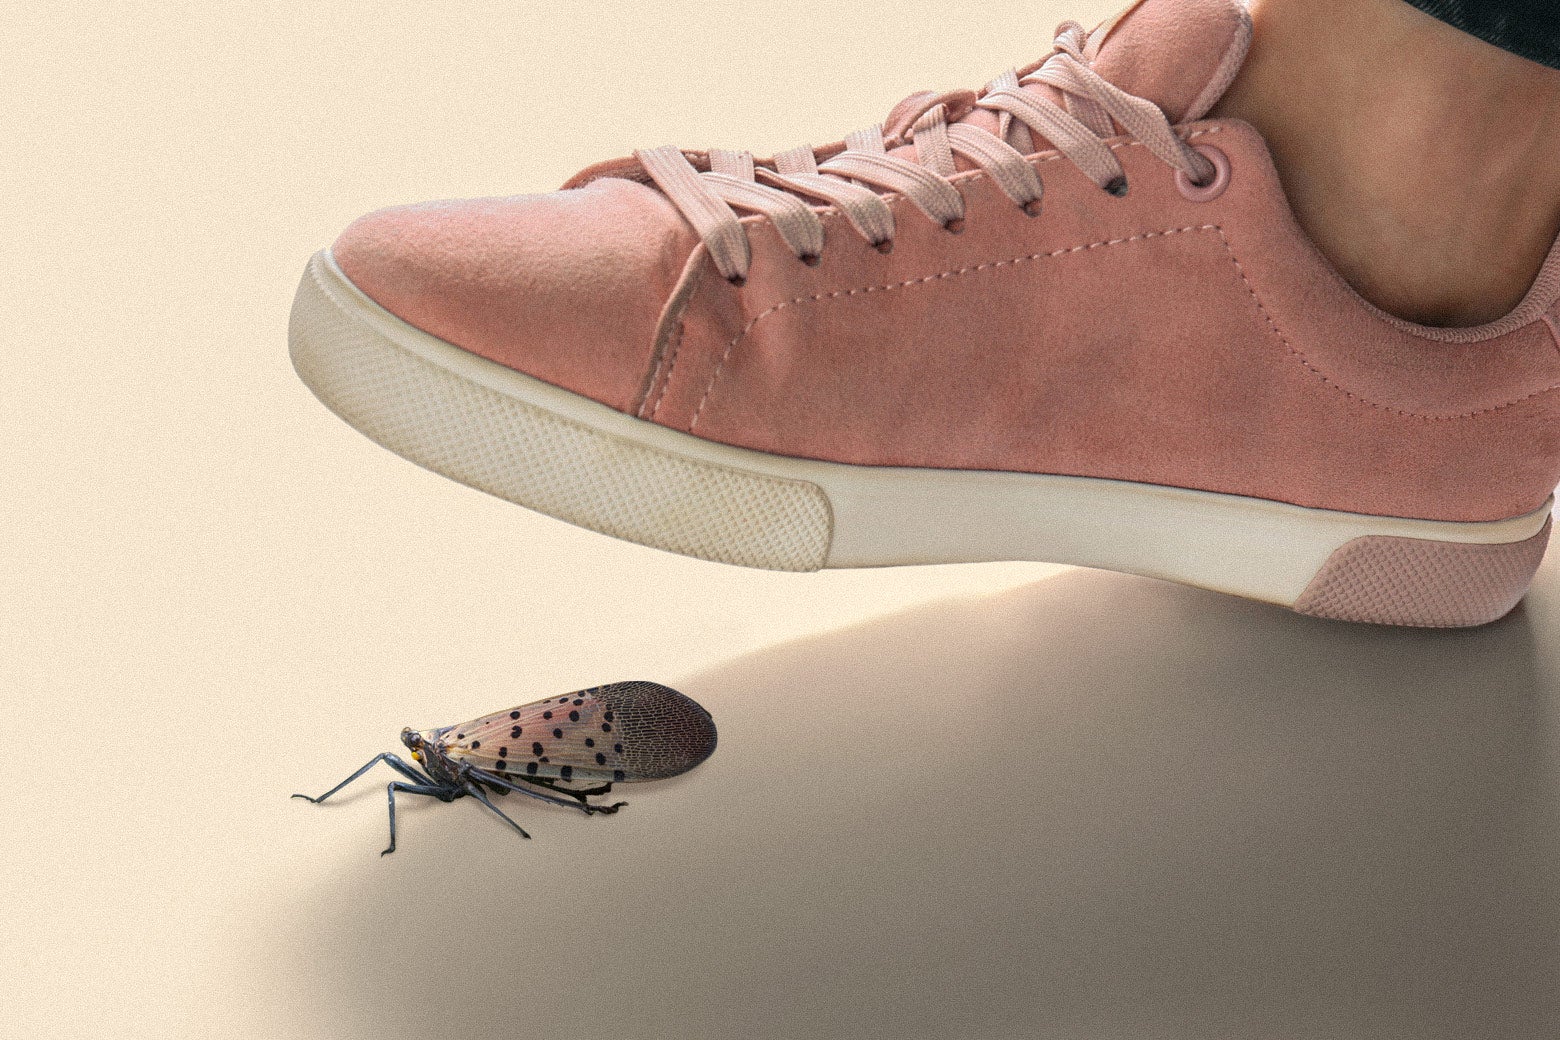 A pink sneaker hovers over a spotted lanternfly.